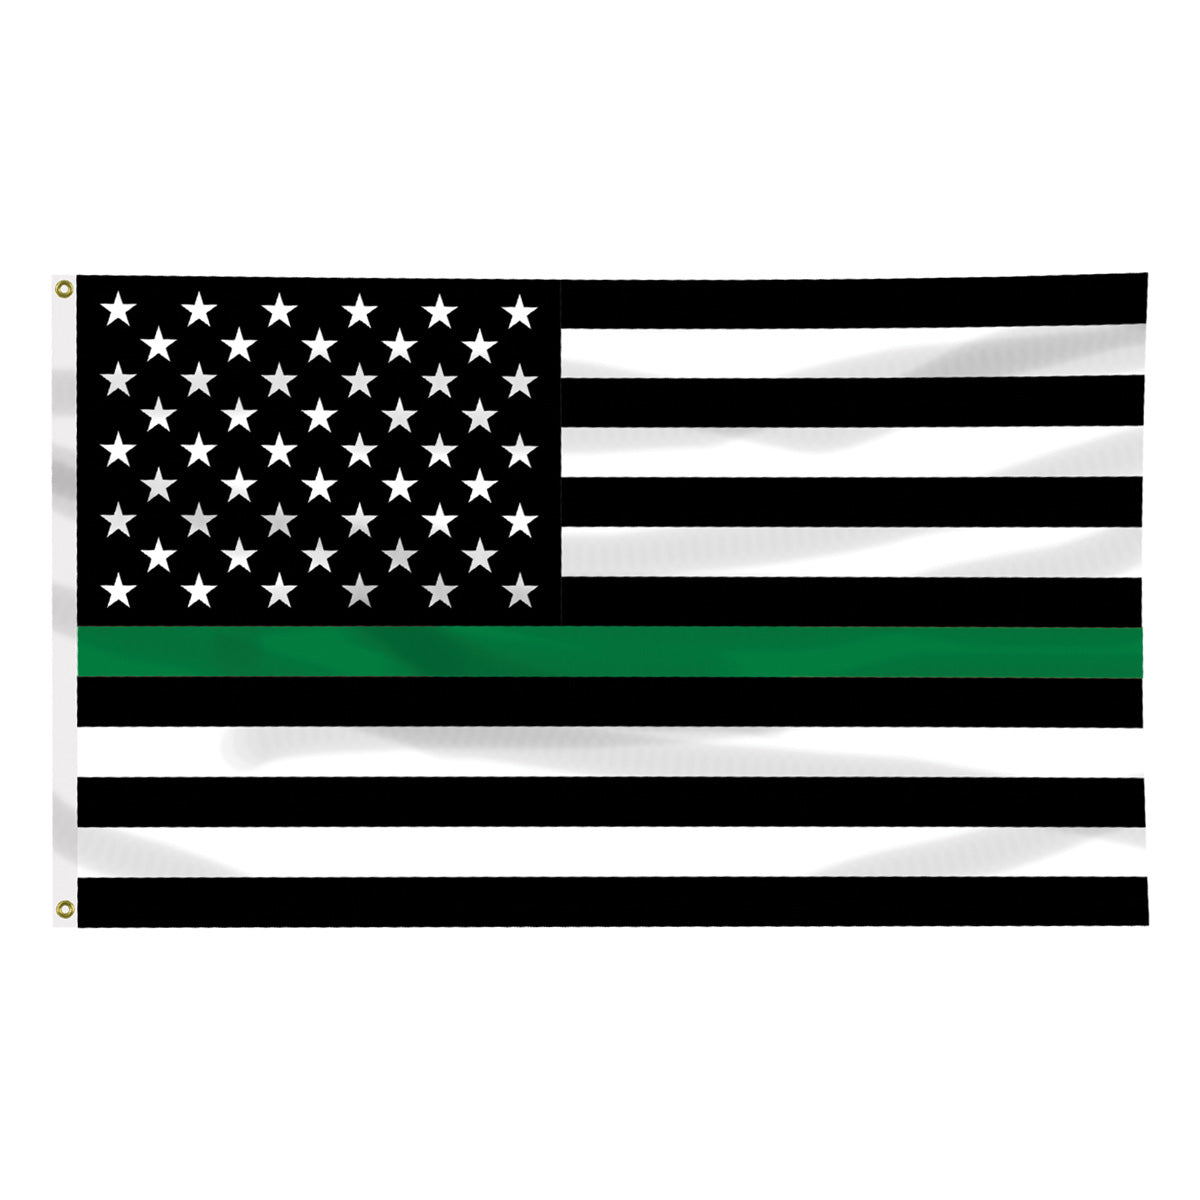 Thin Green Line American Flag 3 X 5 Foot Flag With Grommets Thin Blue Line Usa